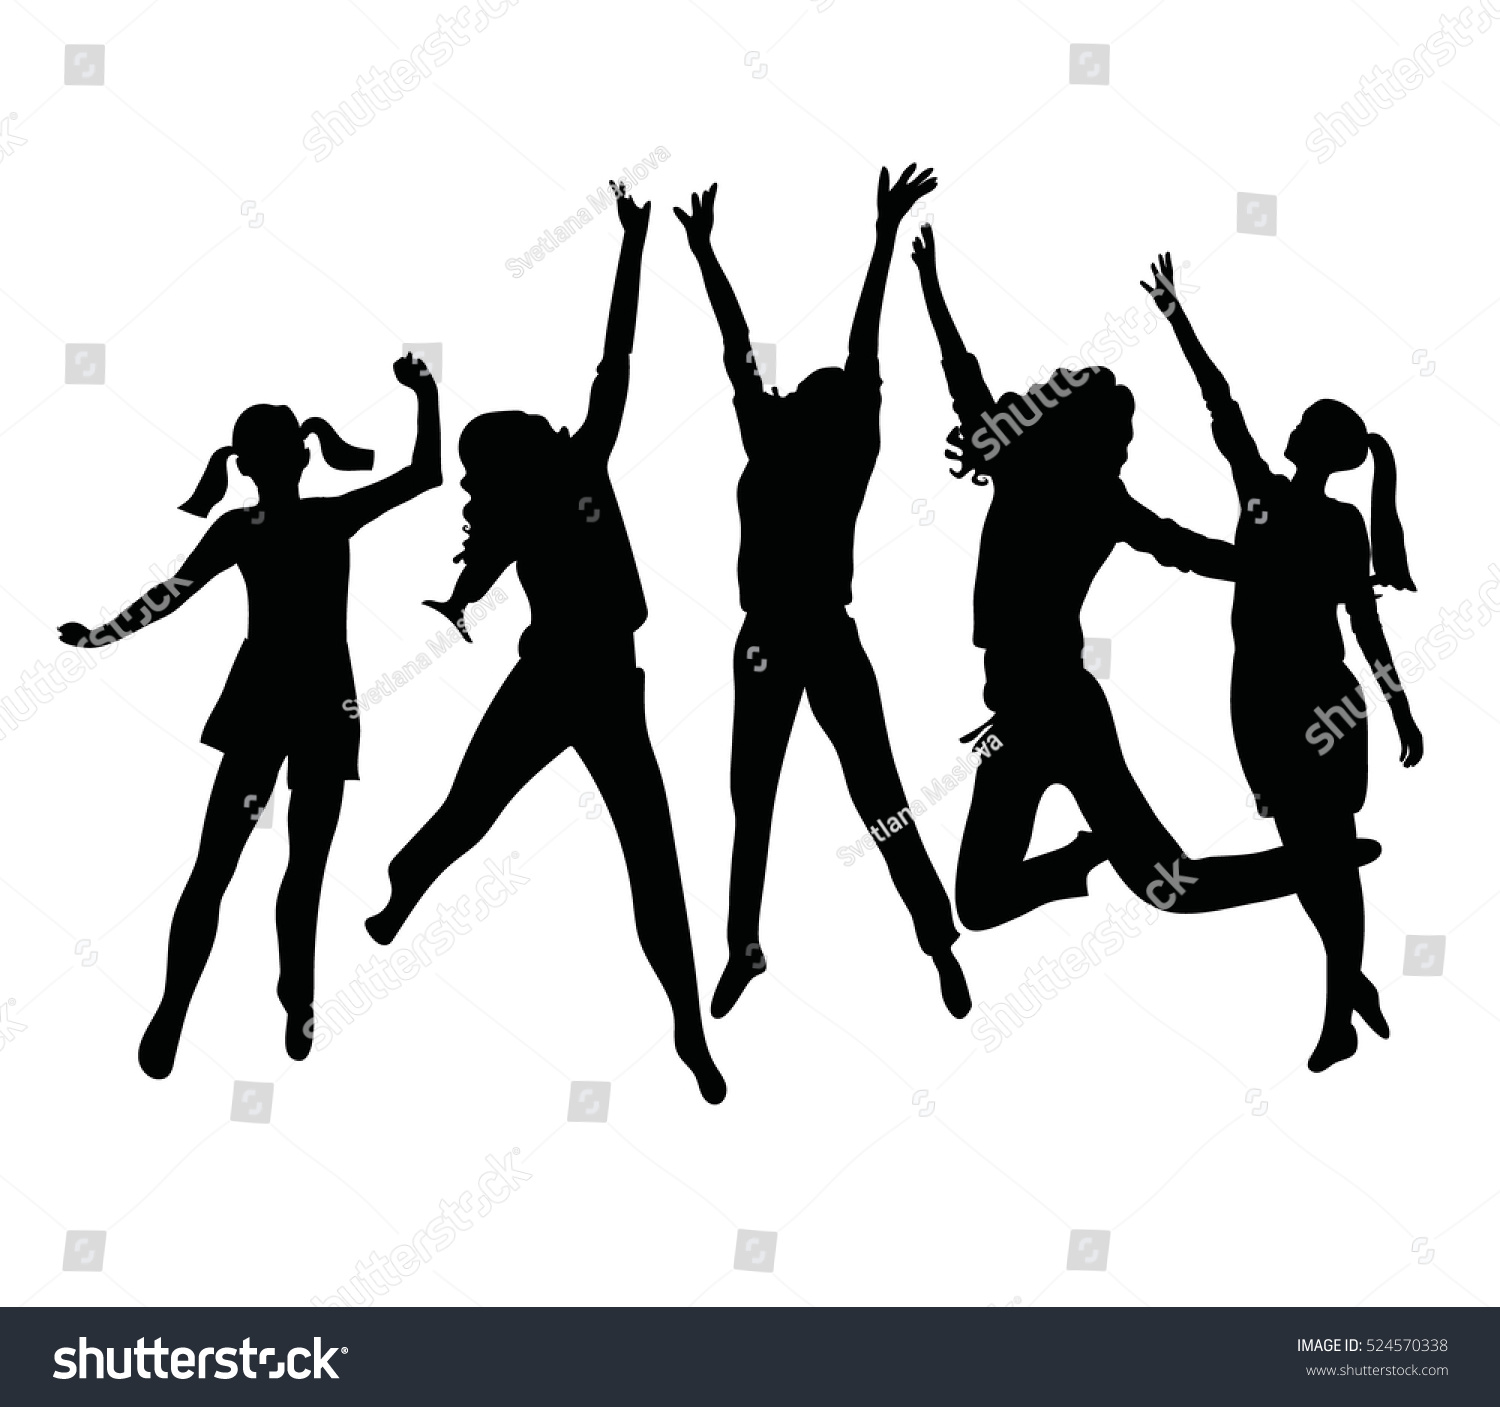 People Silhouette Jumping Girls Women Jumping Stock Vector HD ...